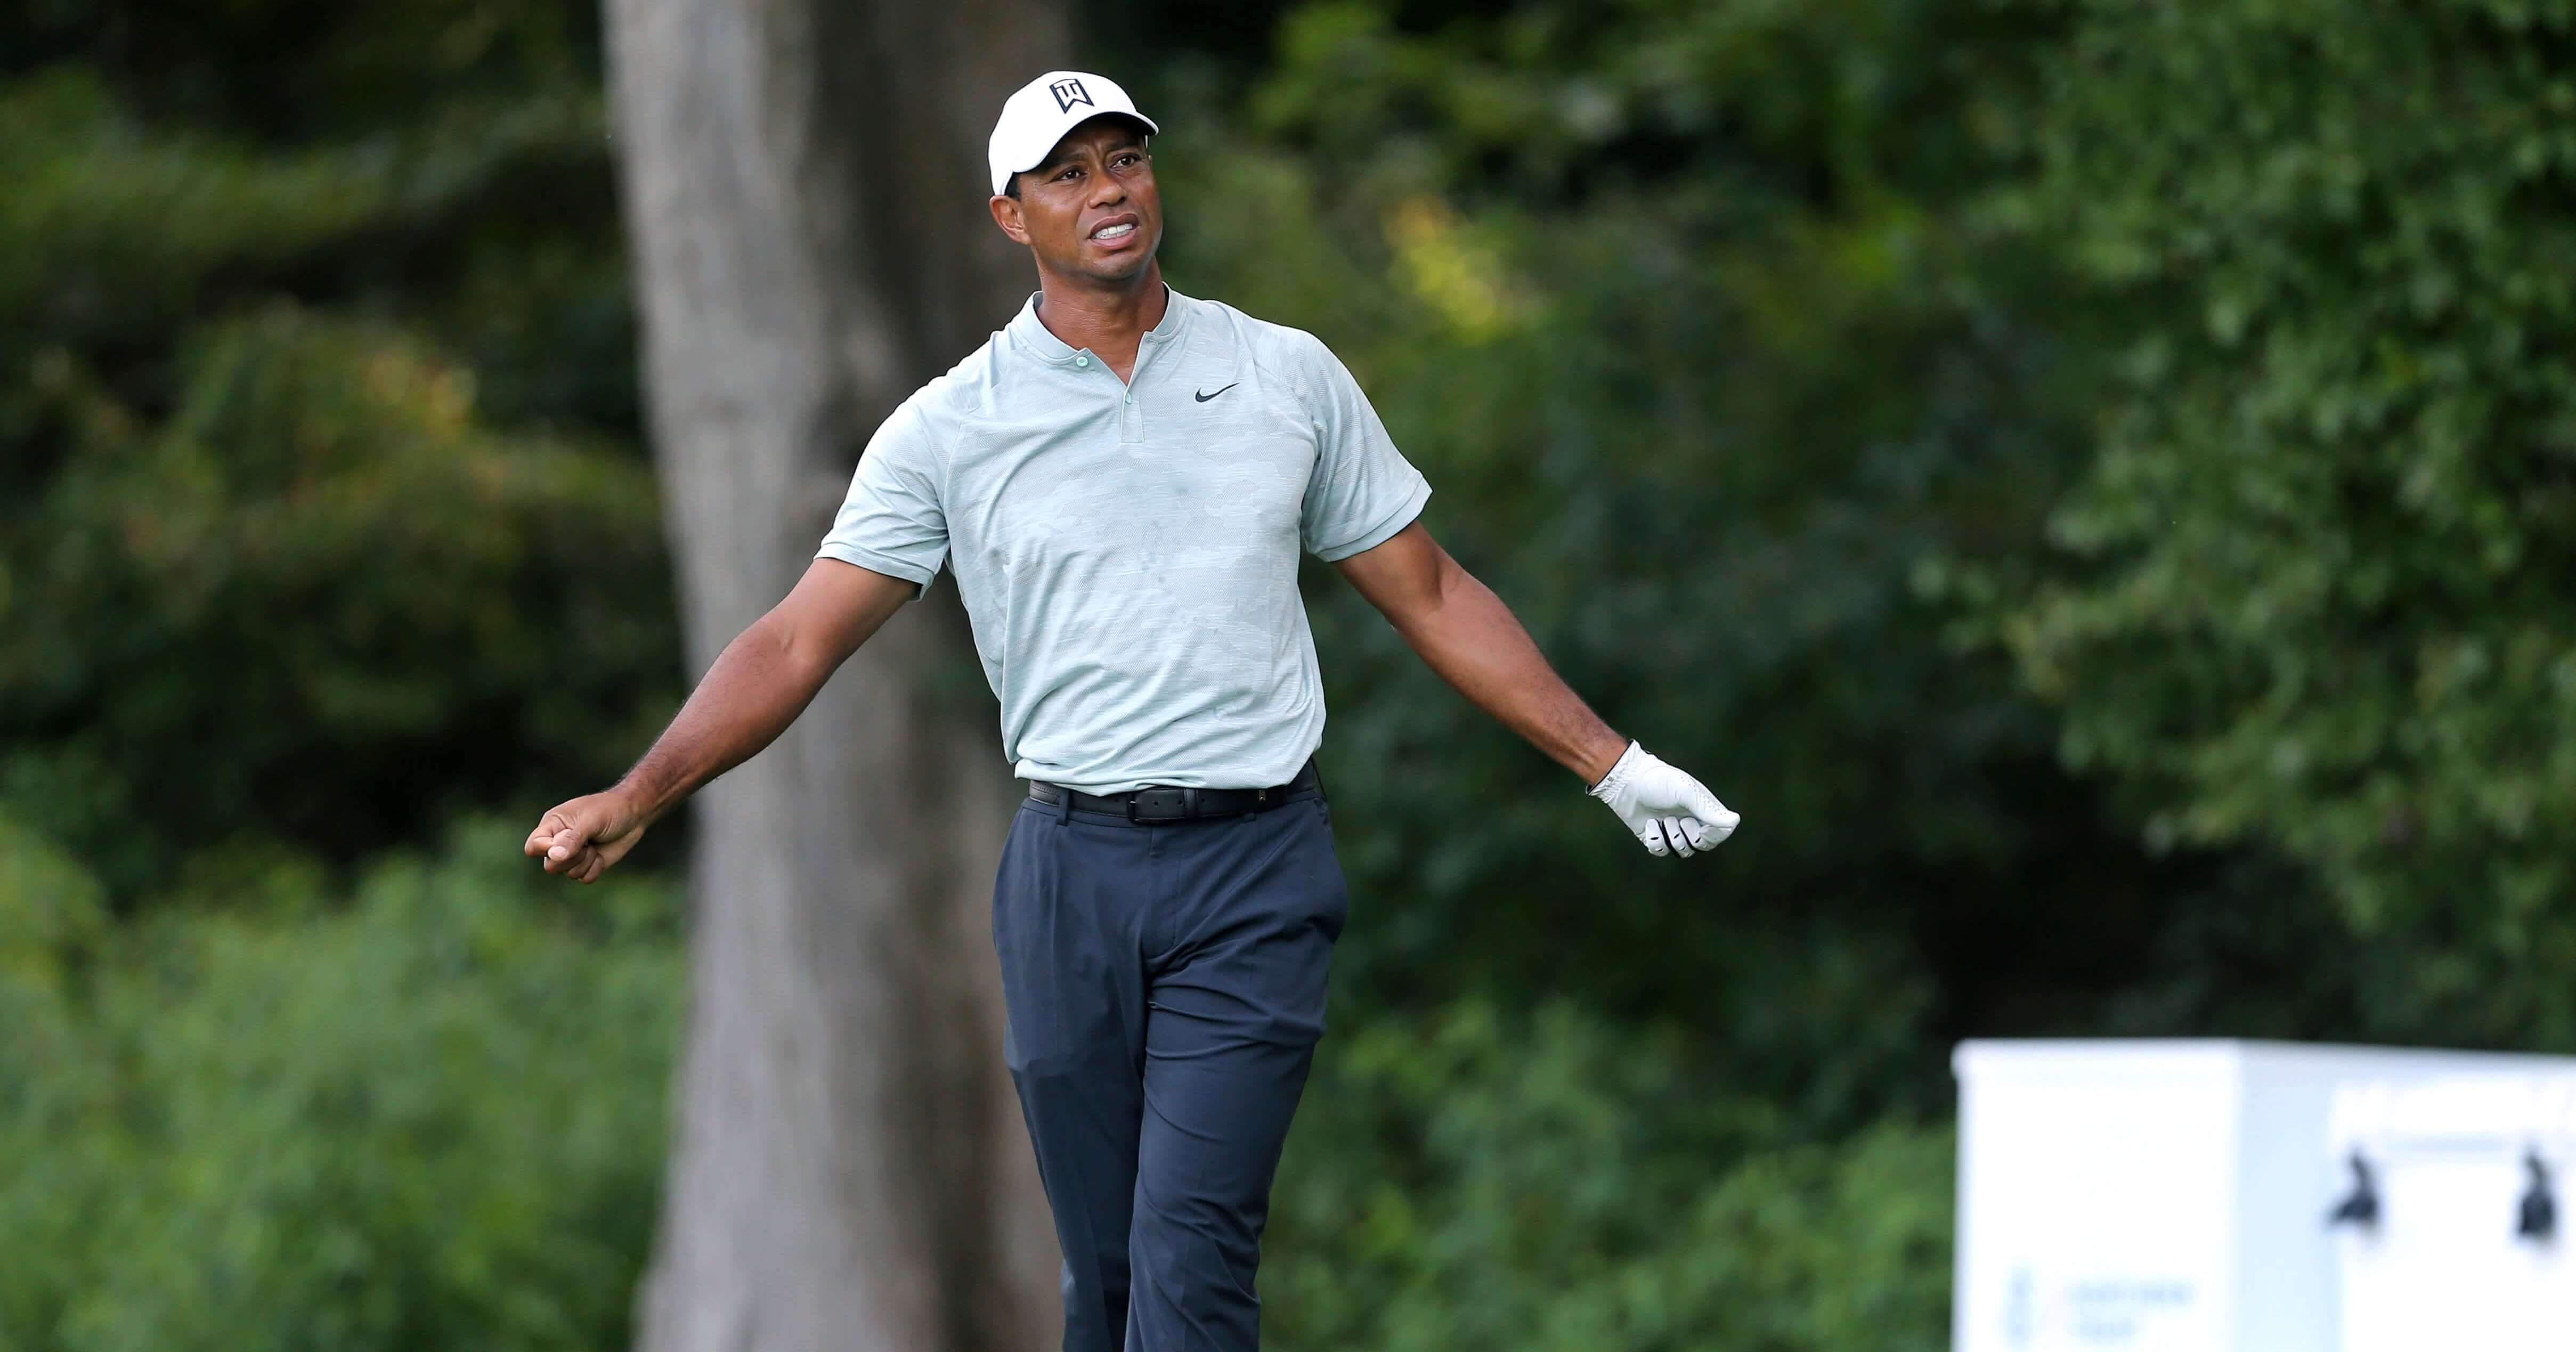 Tiger Woods reacts to his shot on the fourth hole during the third round of the Northern Trust golf tournament Saturday in Paramus, N.J.